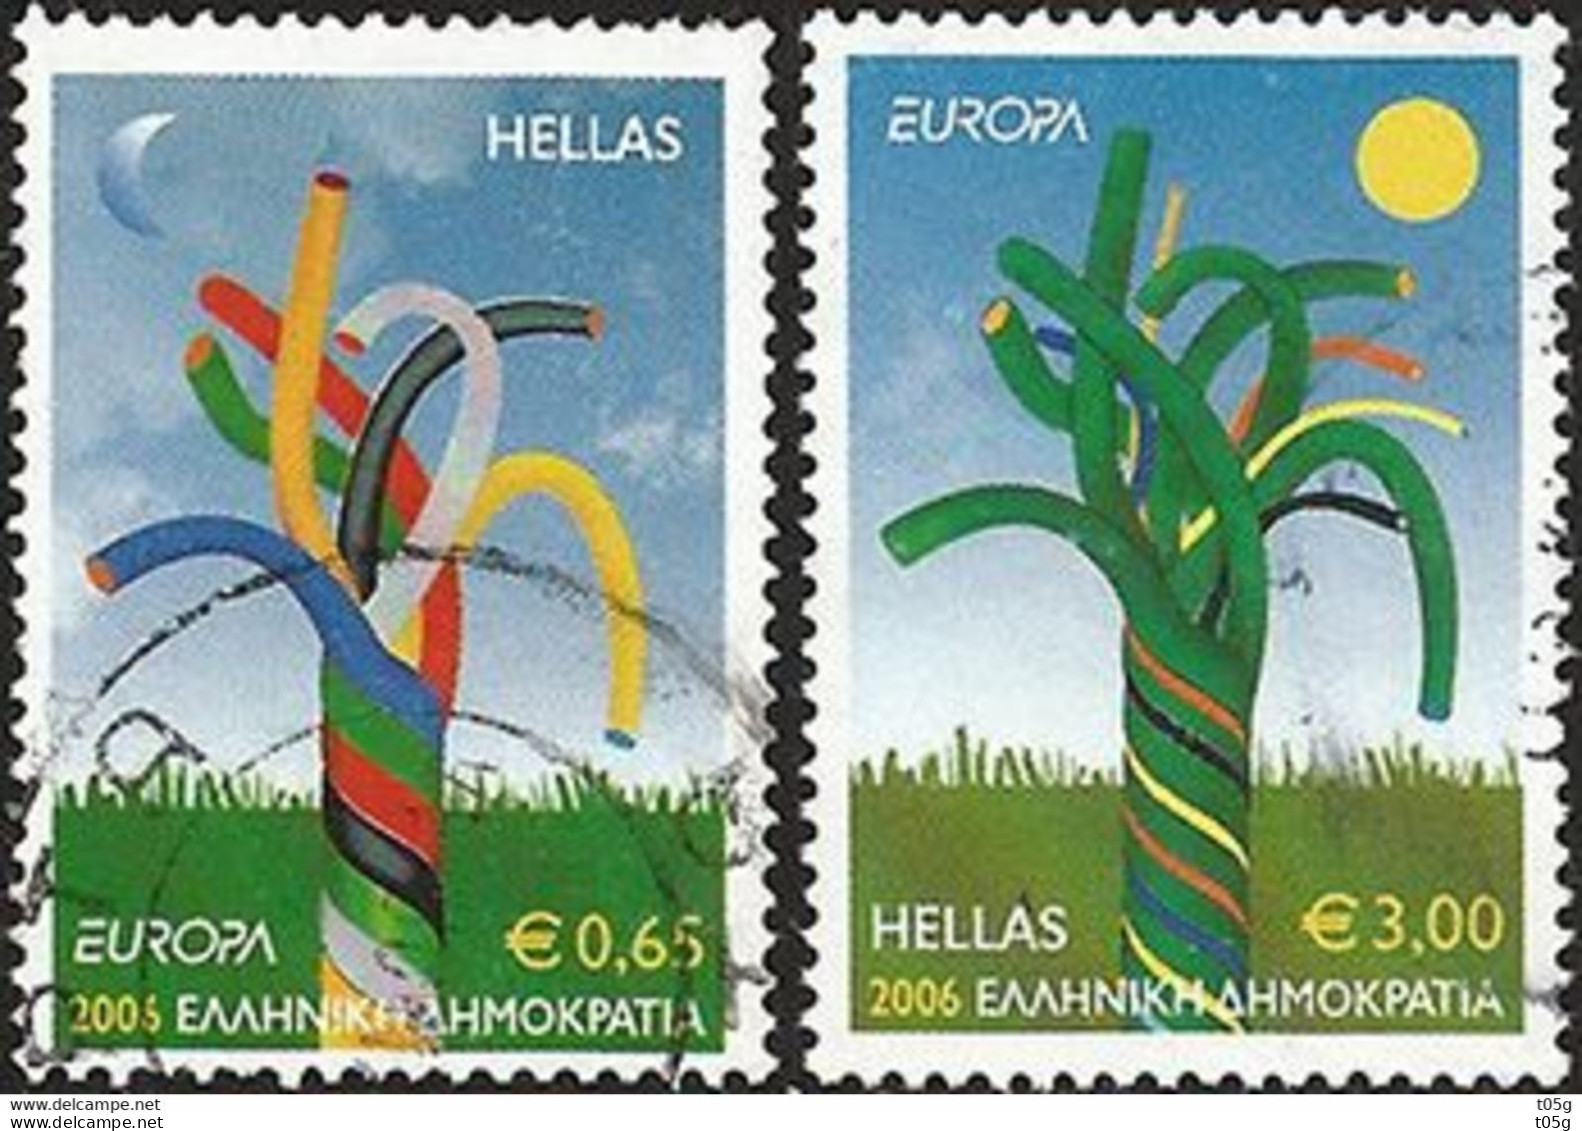 GREECE- GRECE - HELLAS 2006: Compl. Set Used Europa 2006 - Used Stamps